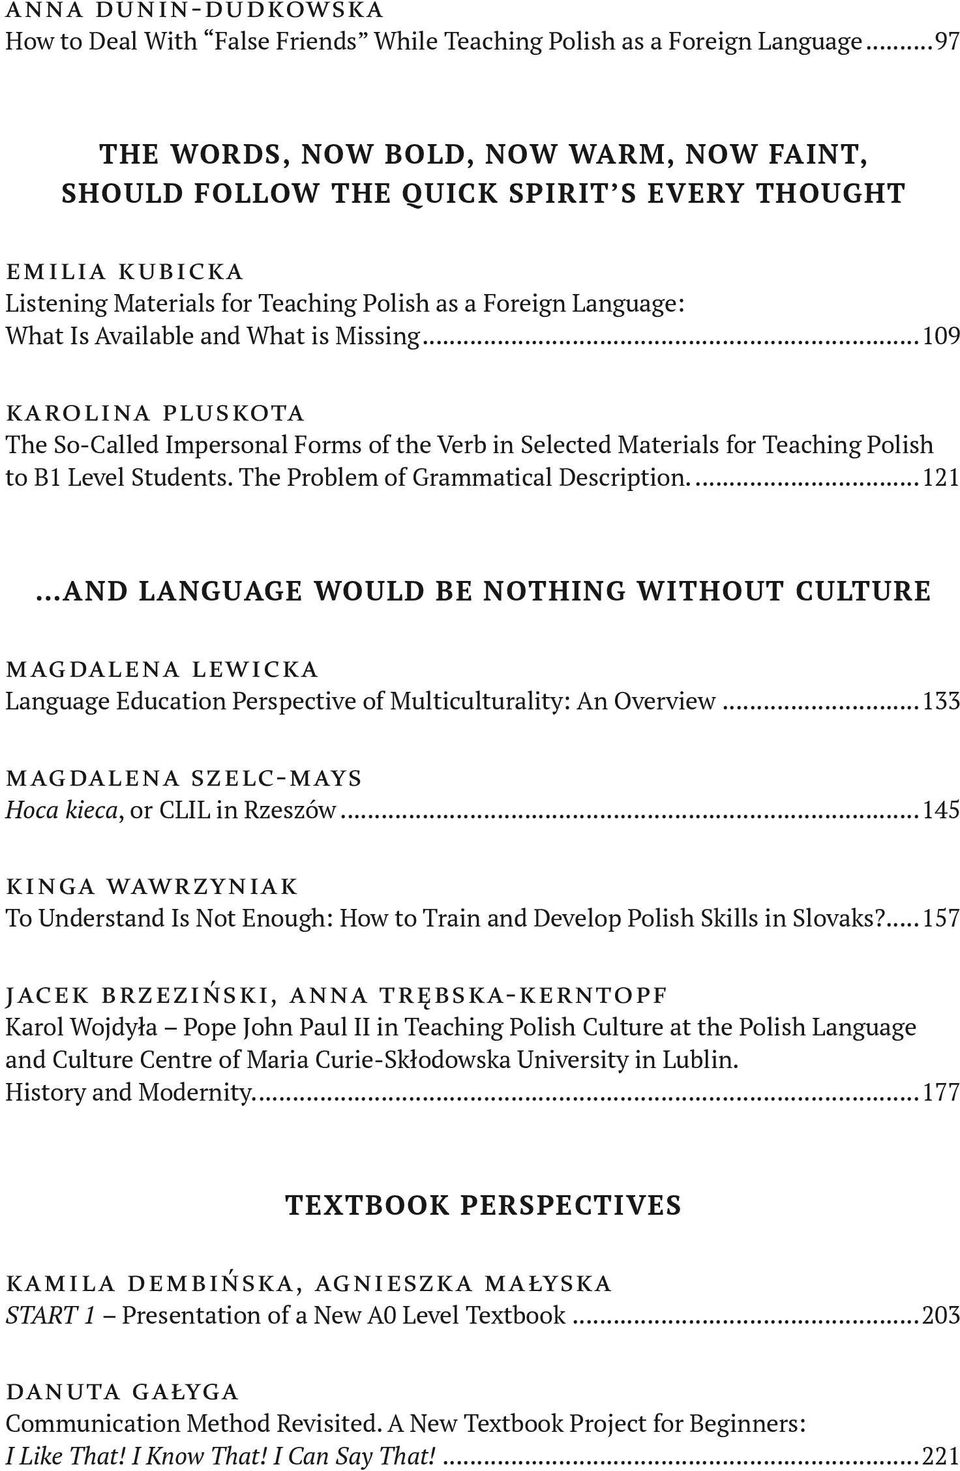 is Missing...109 karolina pluskota The So-Called Impersonal Forms of the Verb in Selected Materials for Teaching Polish to B1 Level Students. The Problem of Grammatical Description.